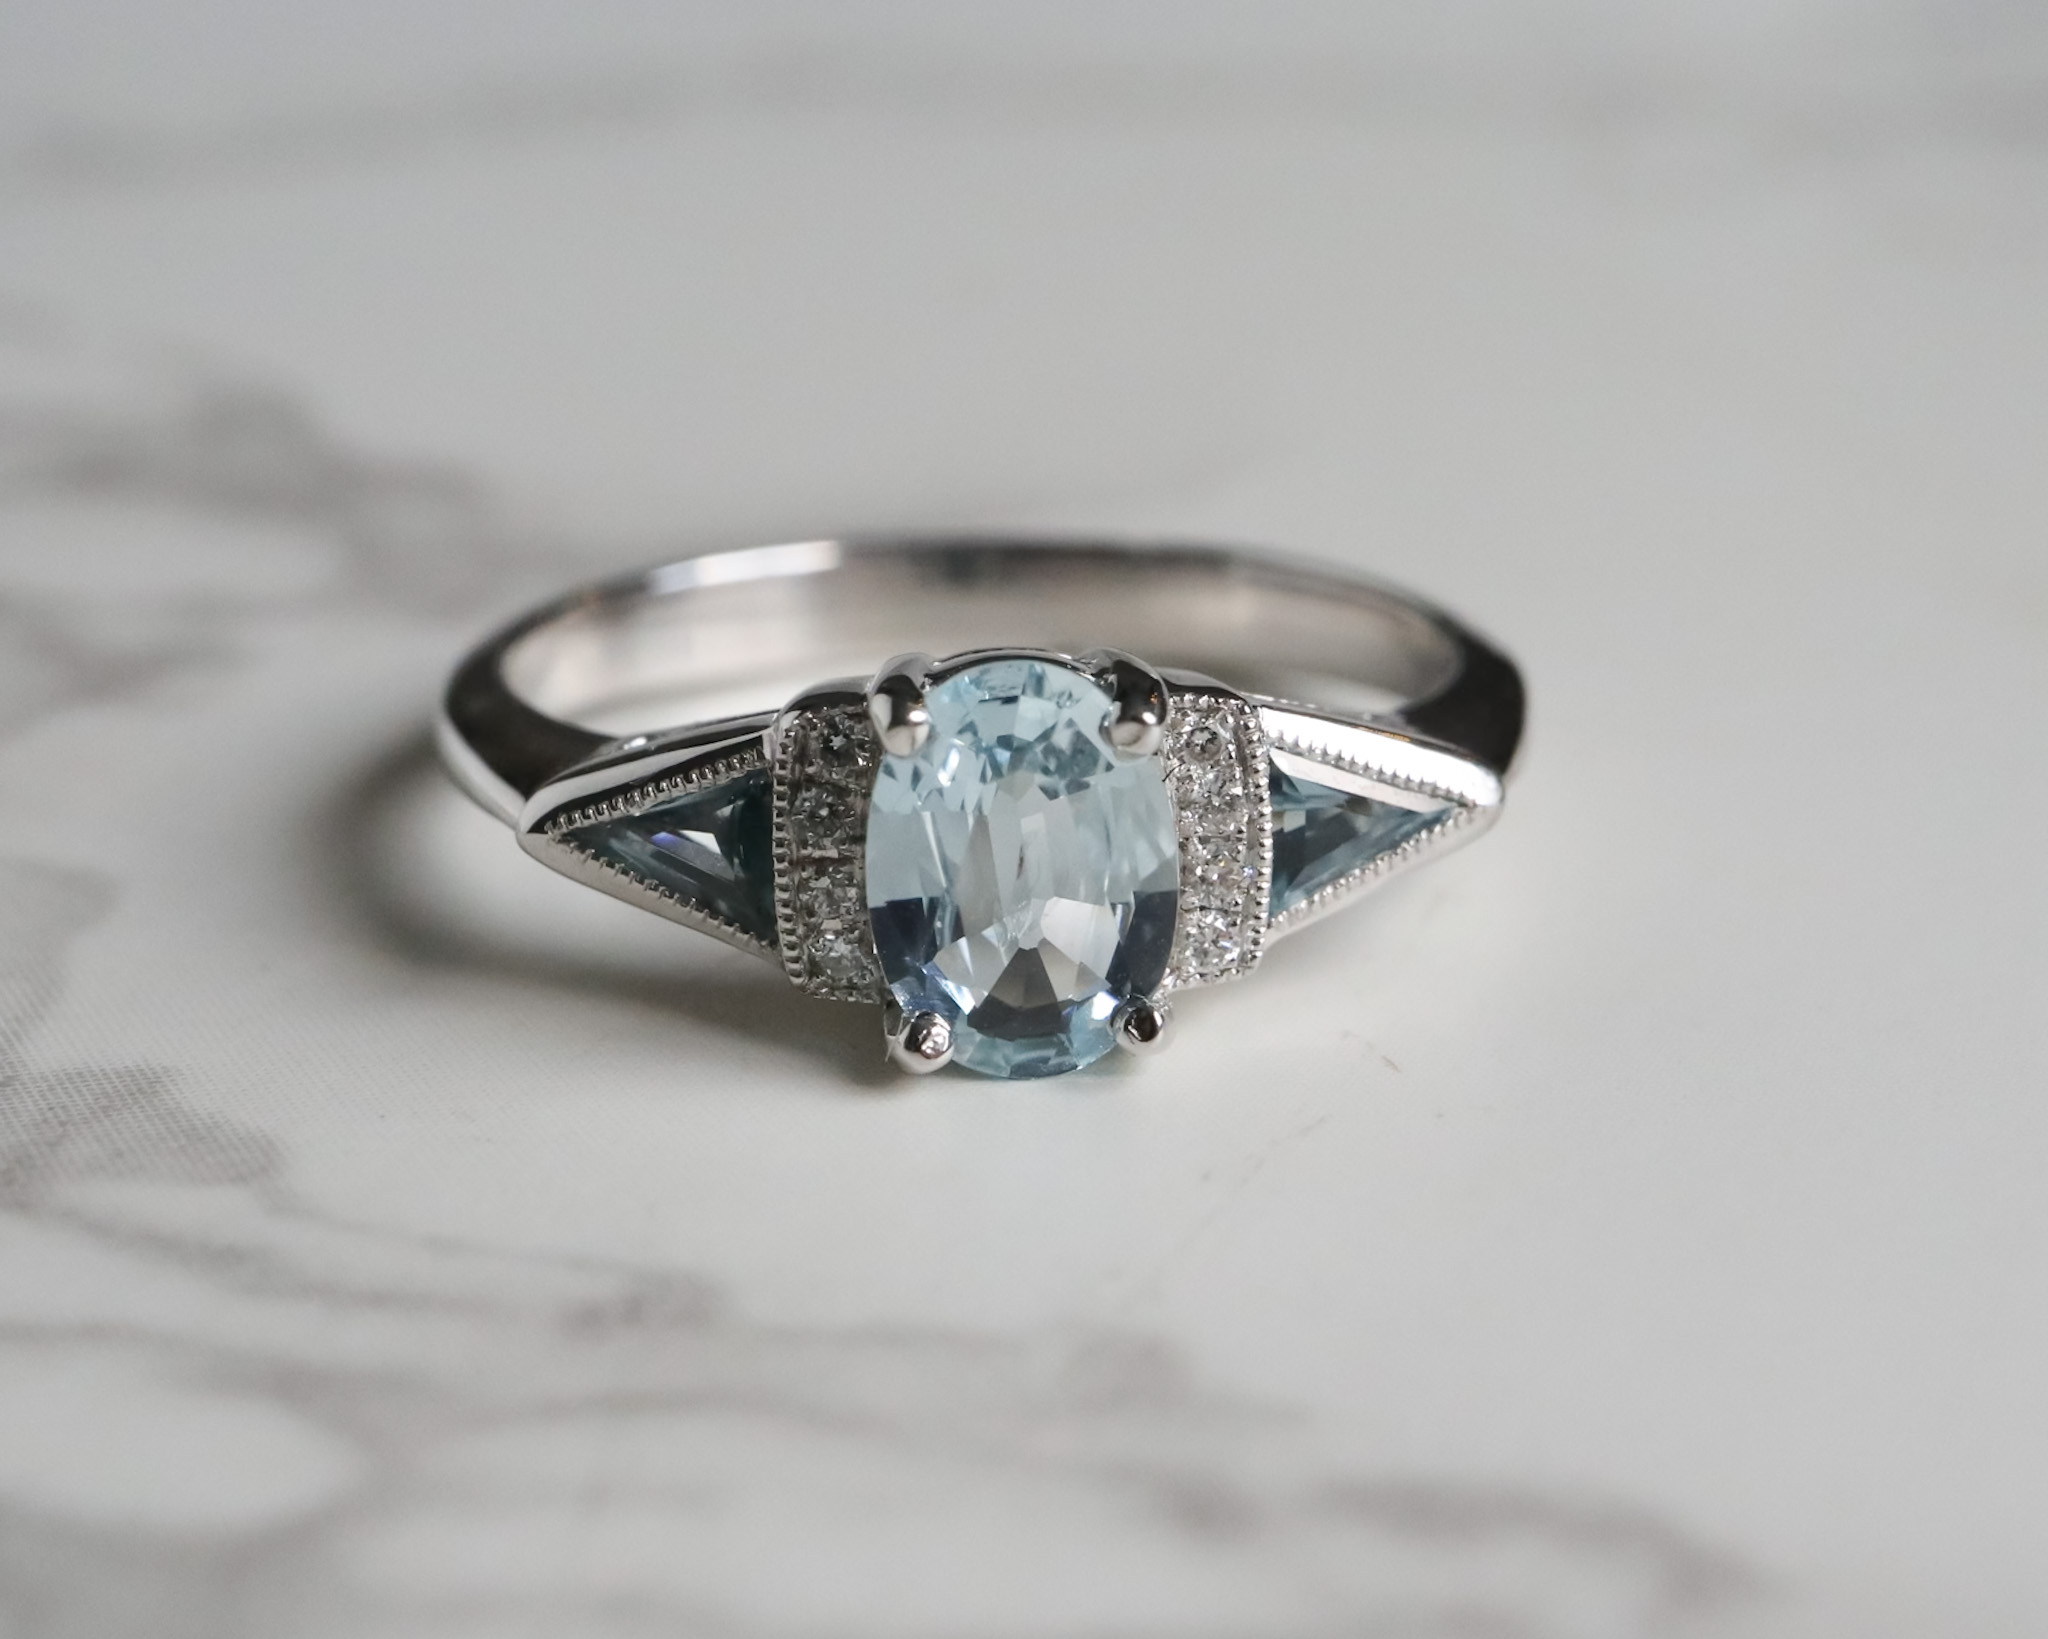 Vintage style aquamarine and diamond ring for sale in Leeds, Yorkshire